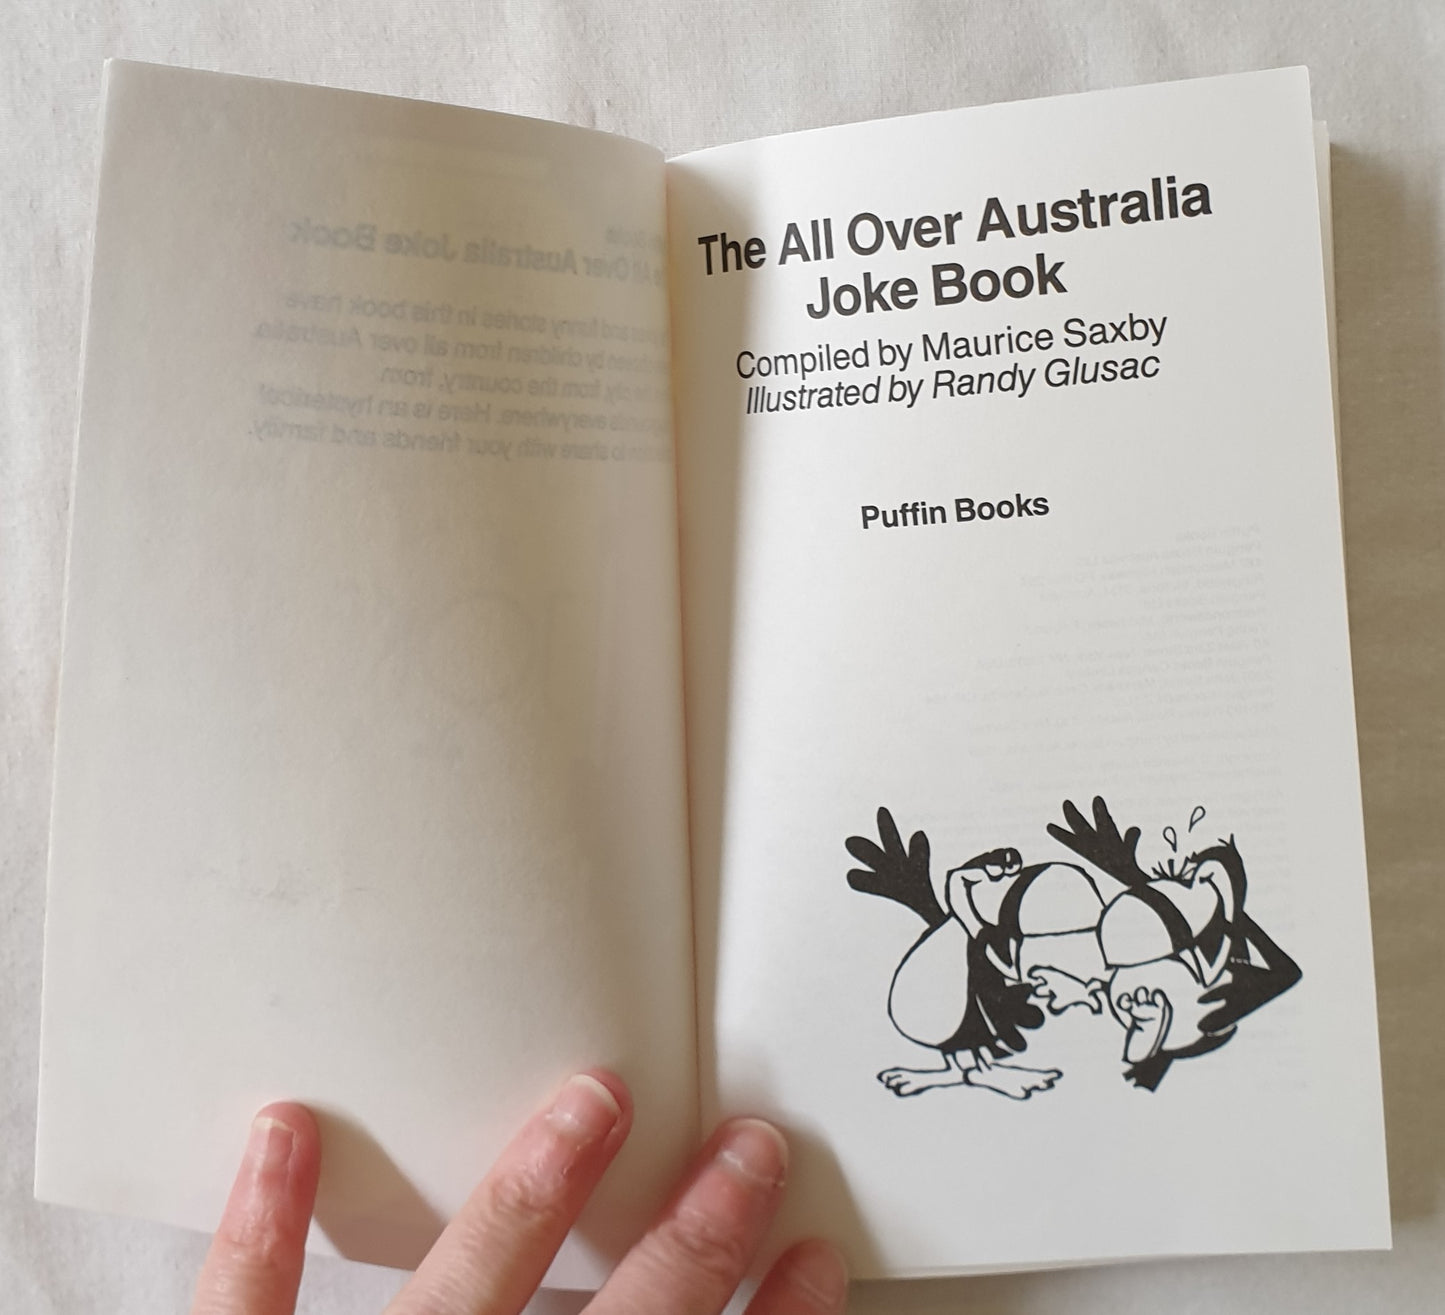 The All Over Australia Joke Book by Maurice Saxby